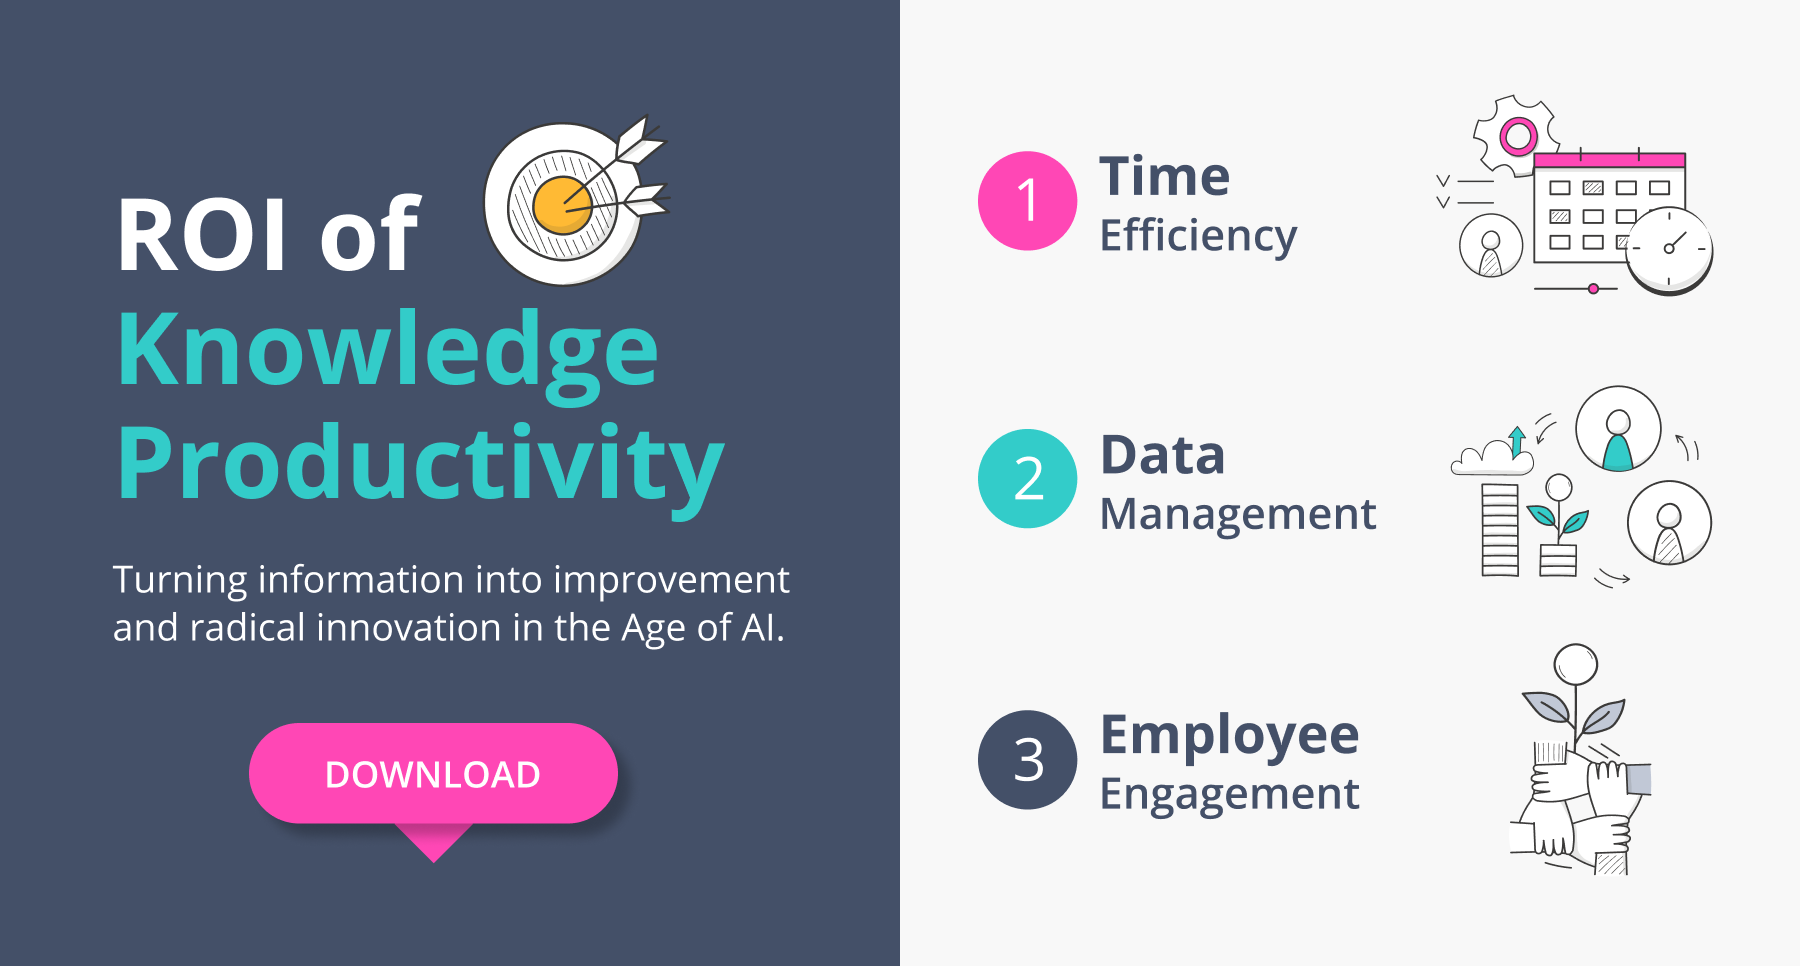 ROI (Return On Investment) of Knowledge Productivity infographic